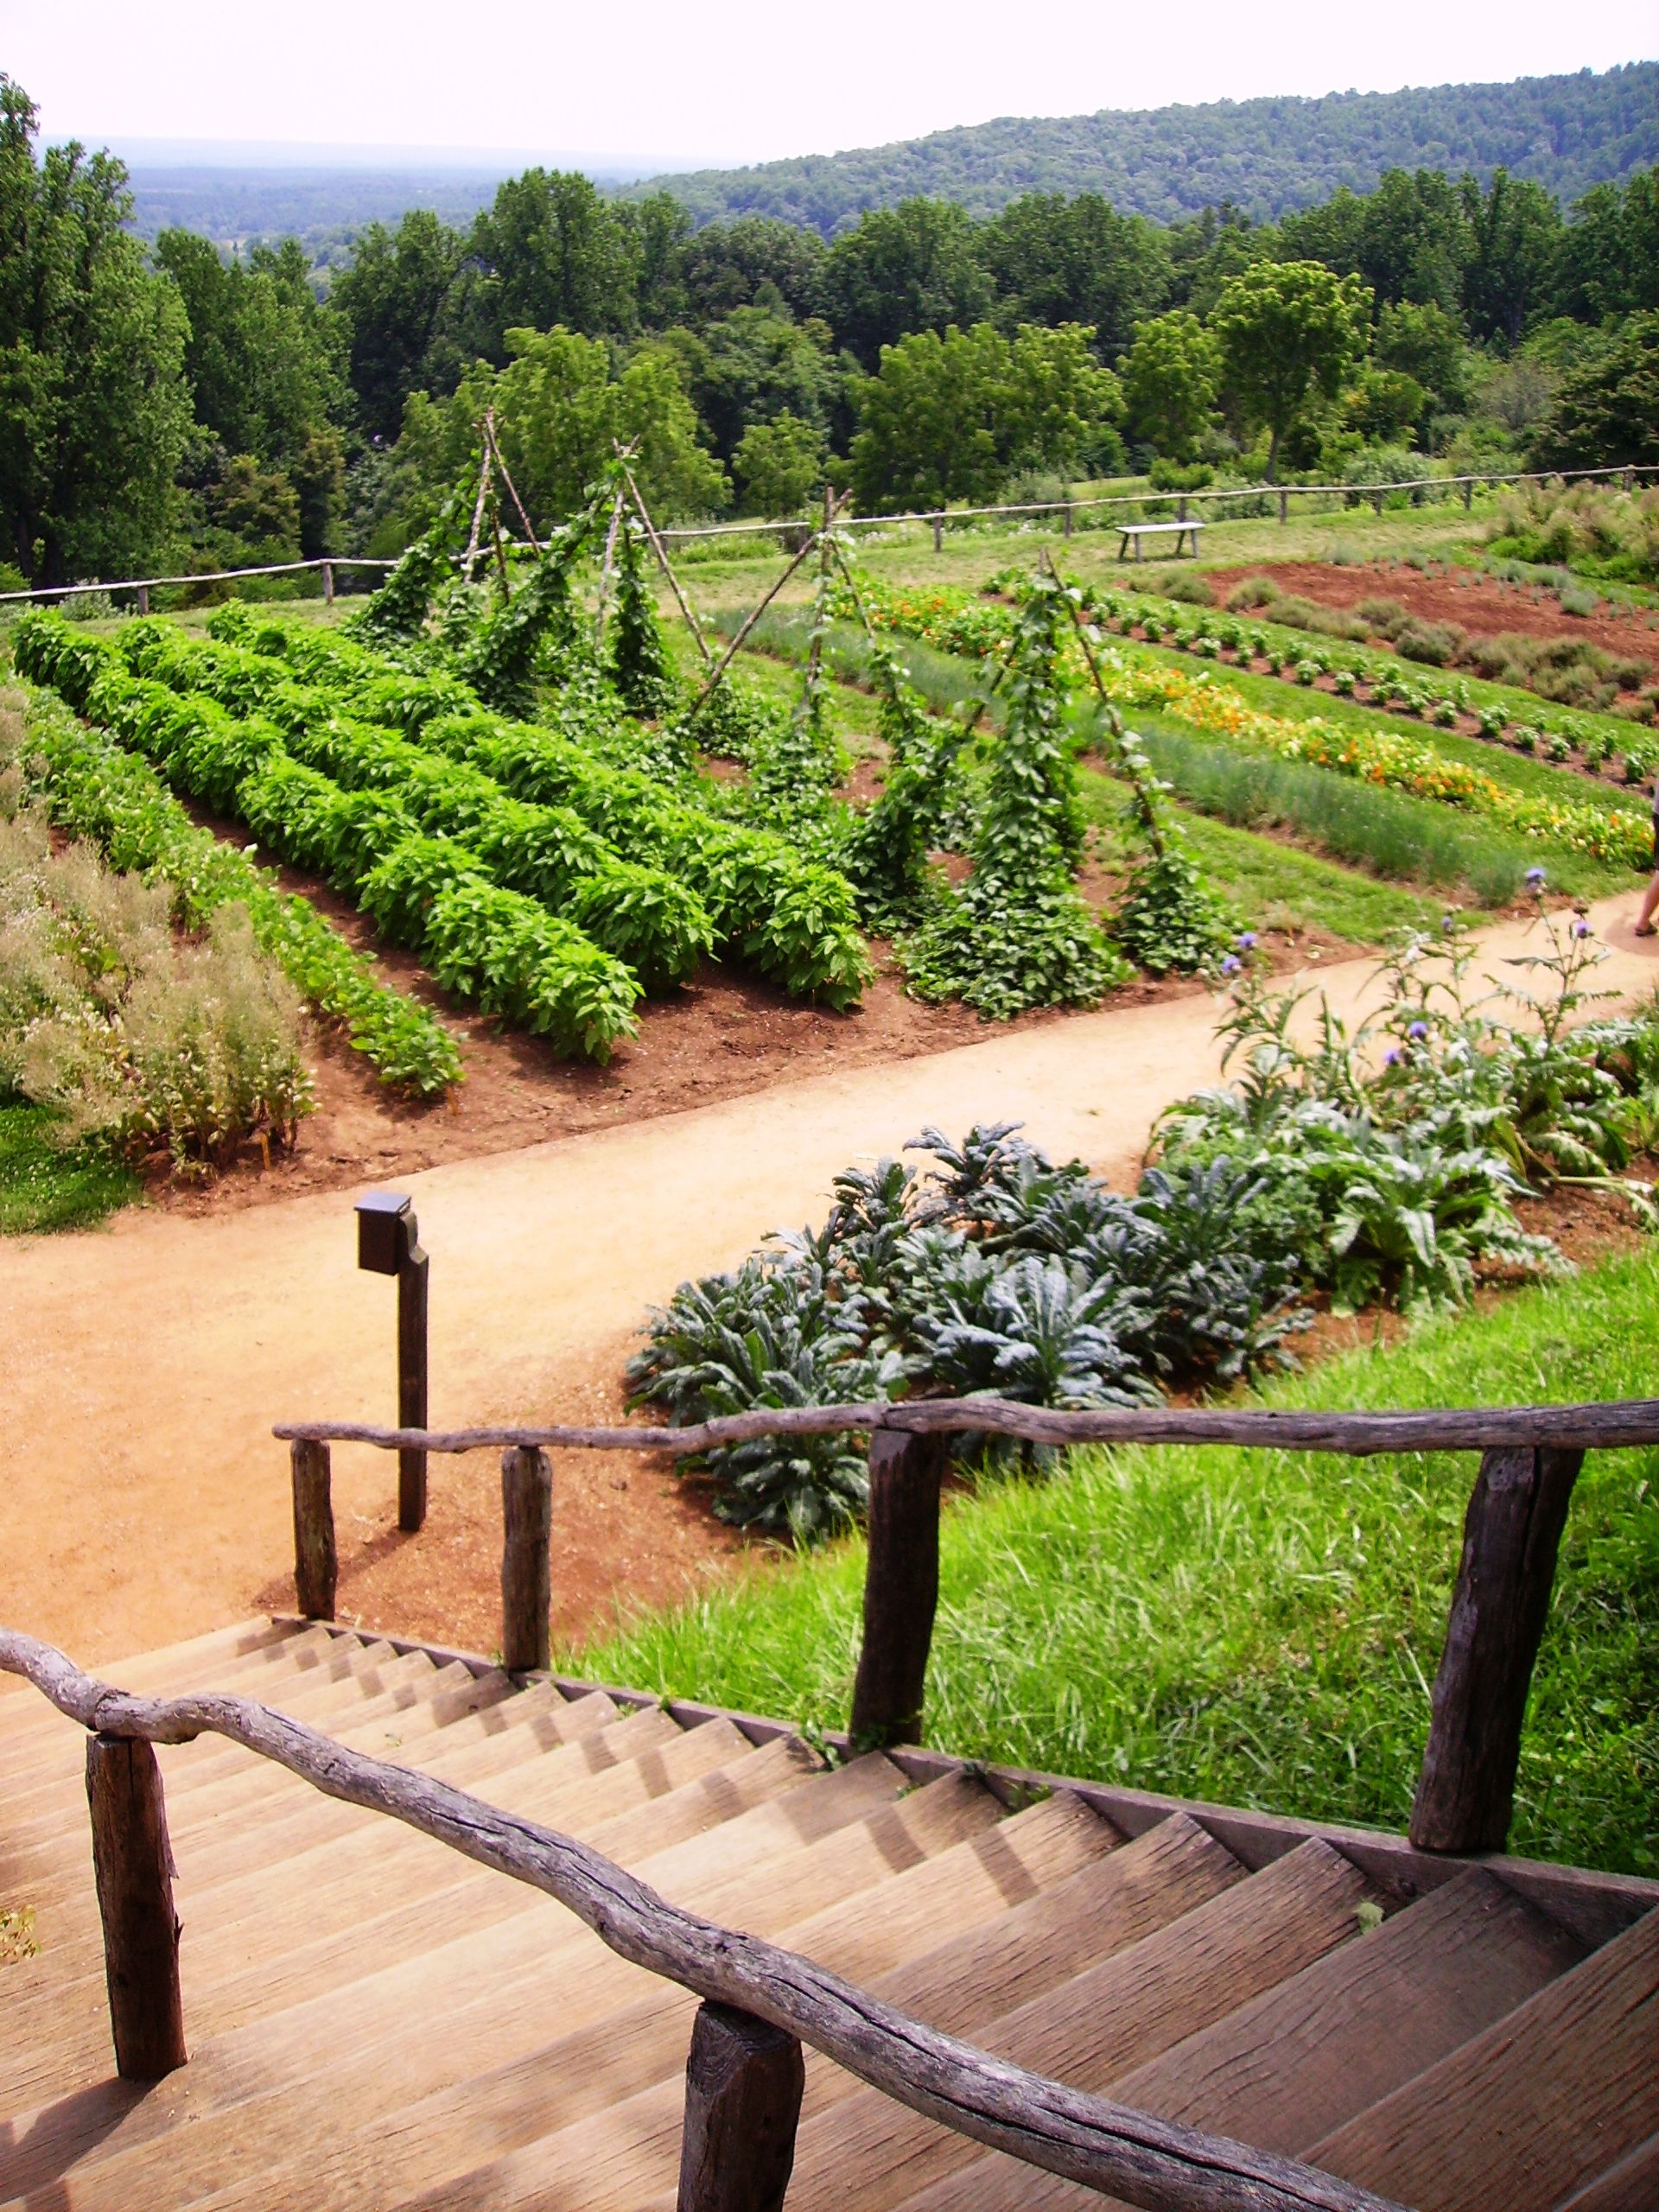 early colonial garden - Steps down to the Vegetable Garden - Thomas